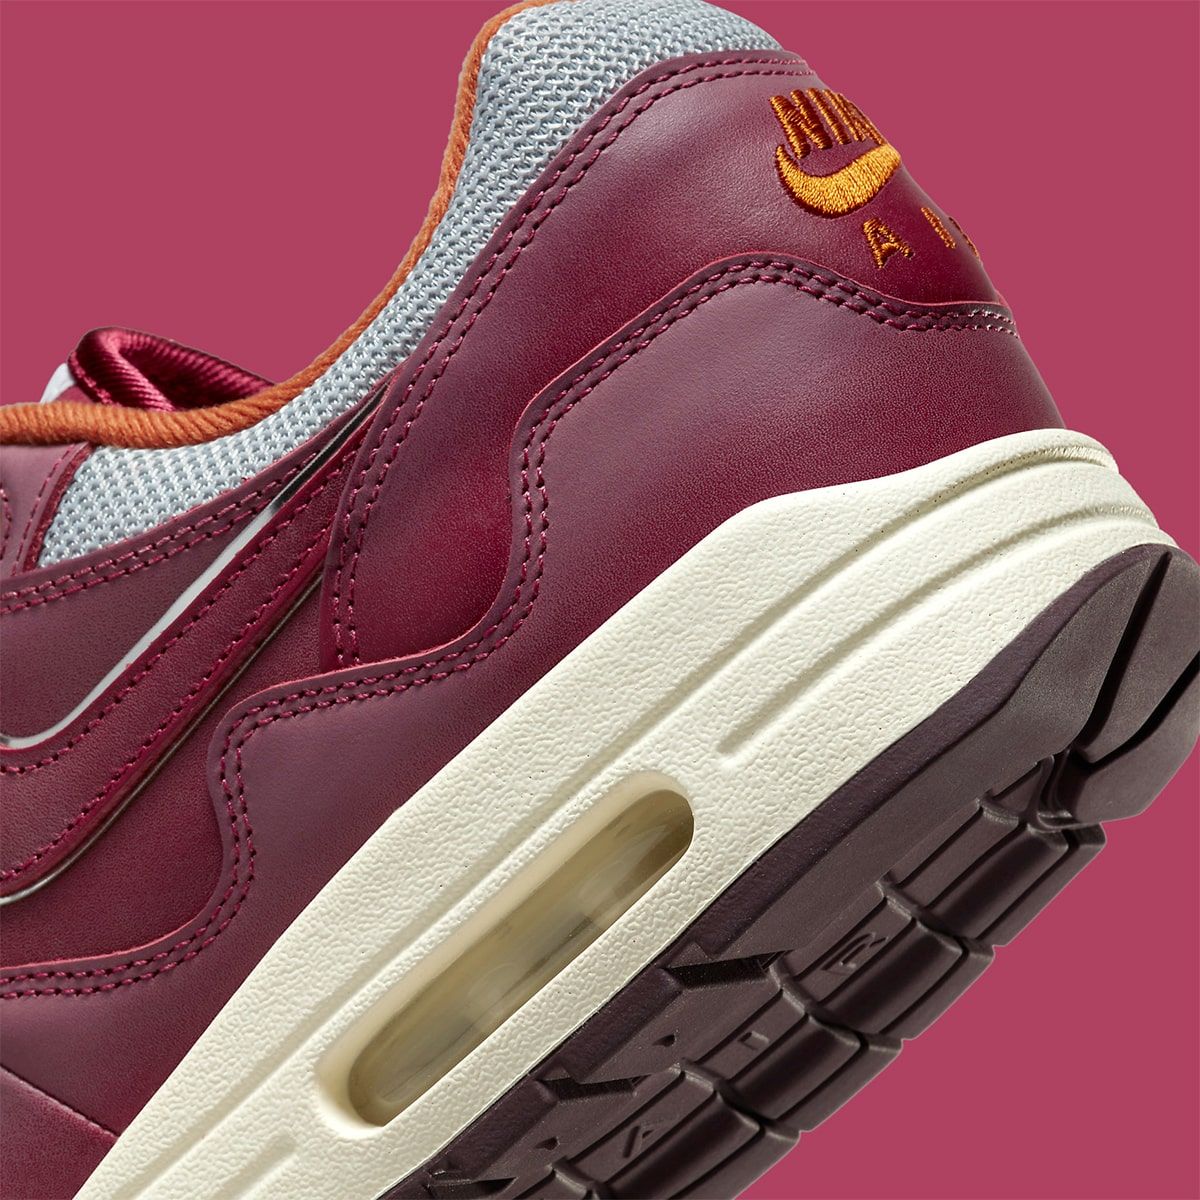 Where to Buy the Patta x Nike Air Max 1 "Night Maroon" | HOUSE OF HEAT